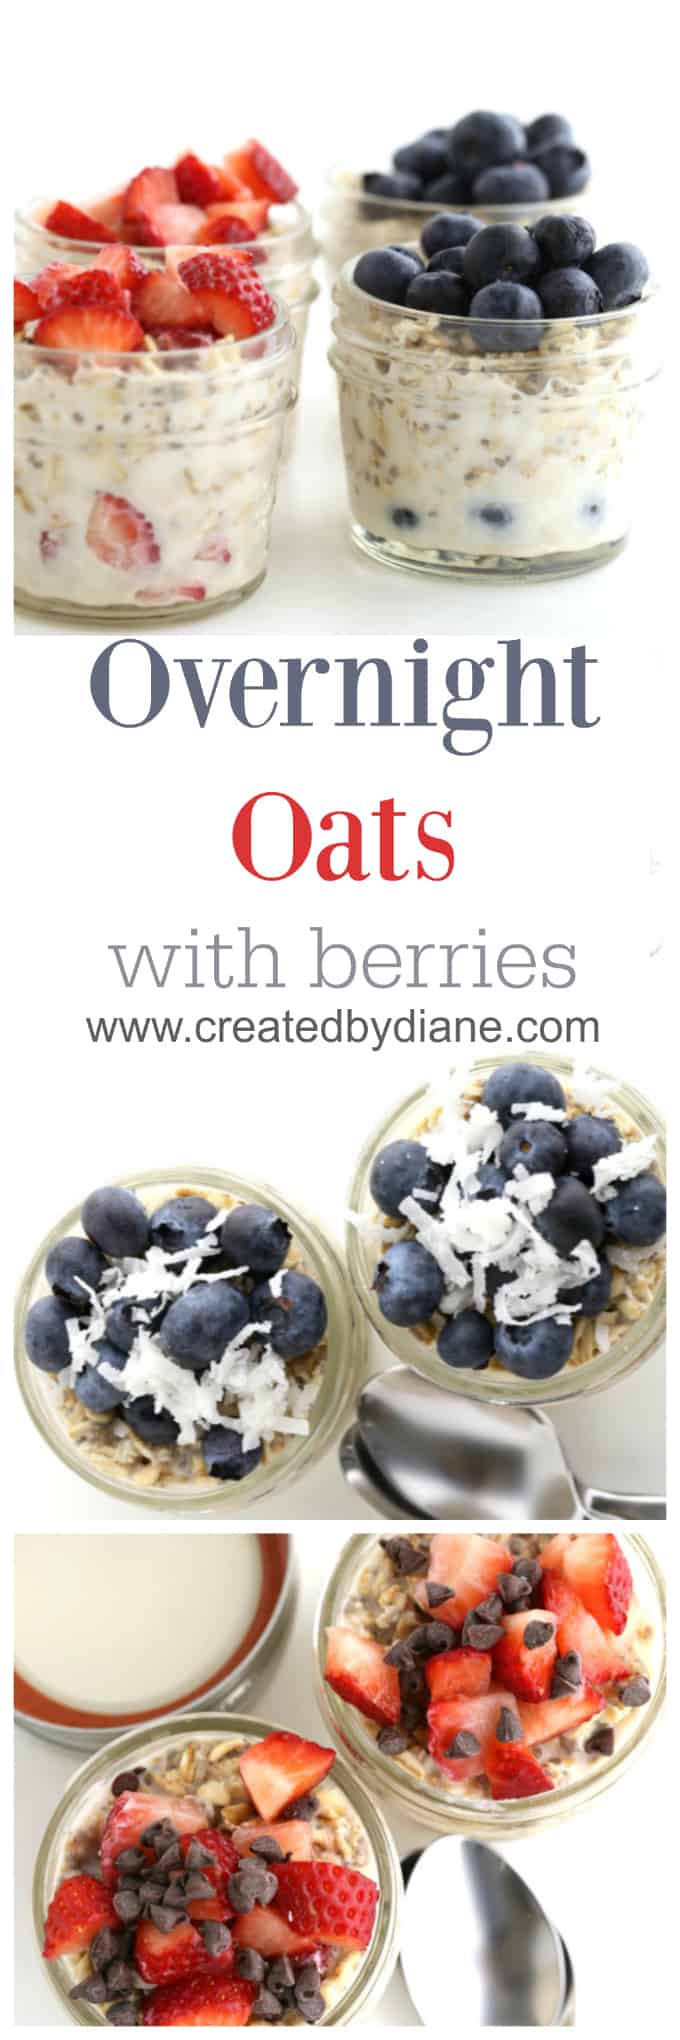 Overnight Oats and Berries | Created by Diane